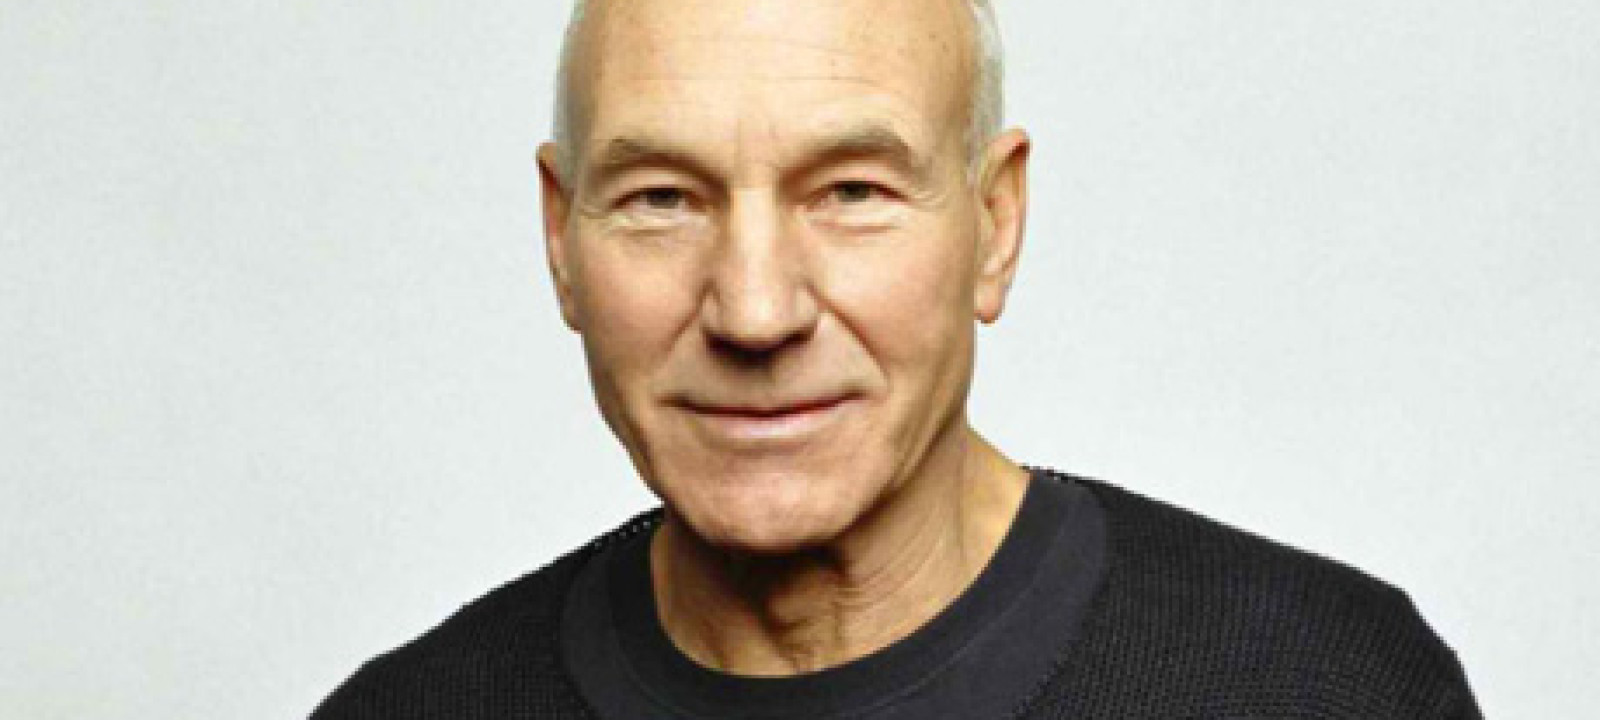 Brits with Birthdays Patrick Stewart Turns 73 and More Anglophenia